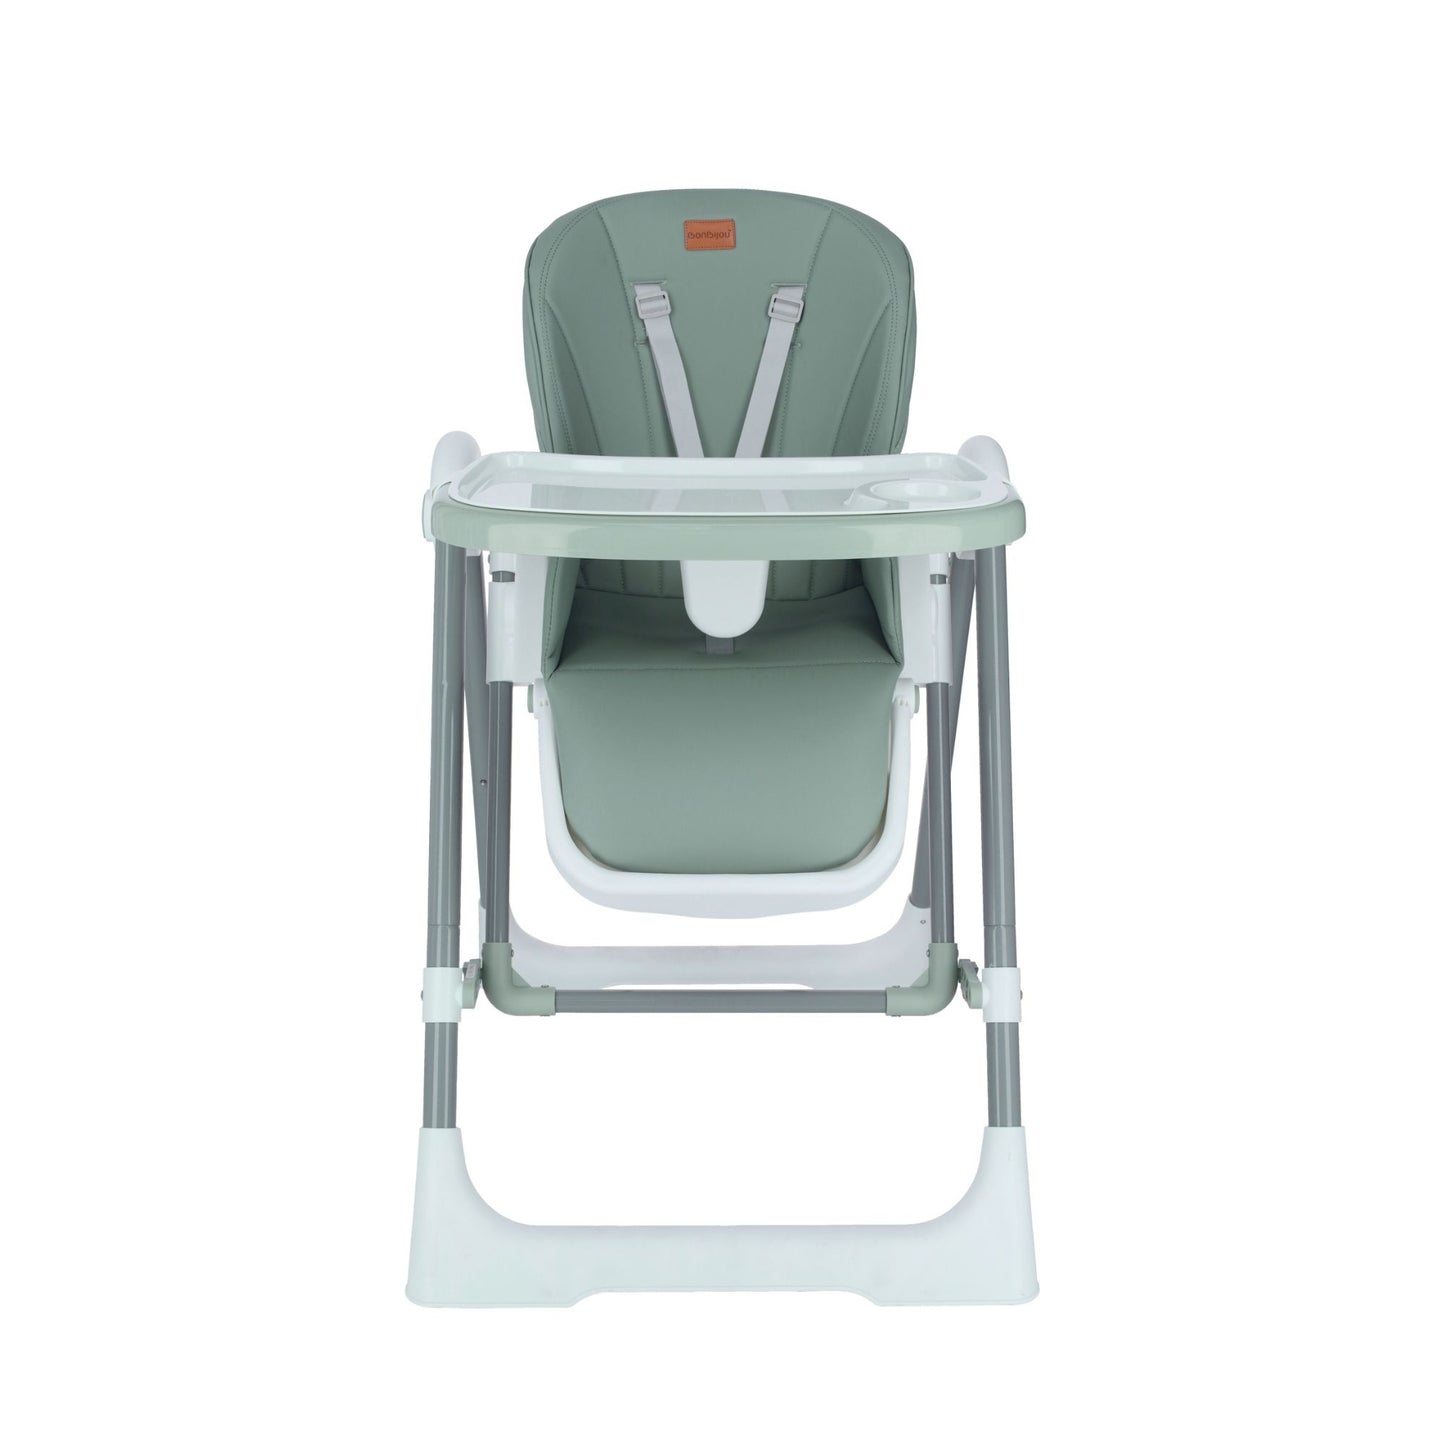 Bonbijou Relax 2-In-1 High Chair With Swing